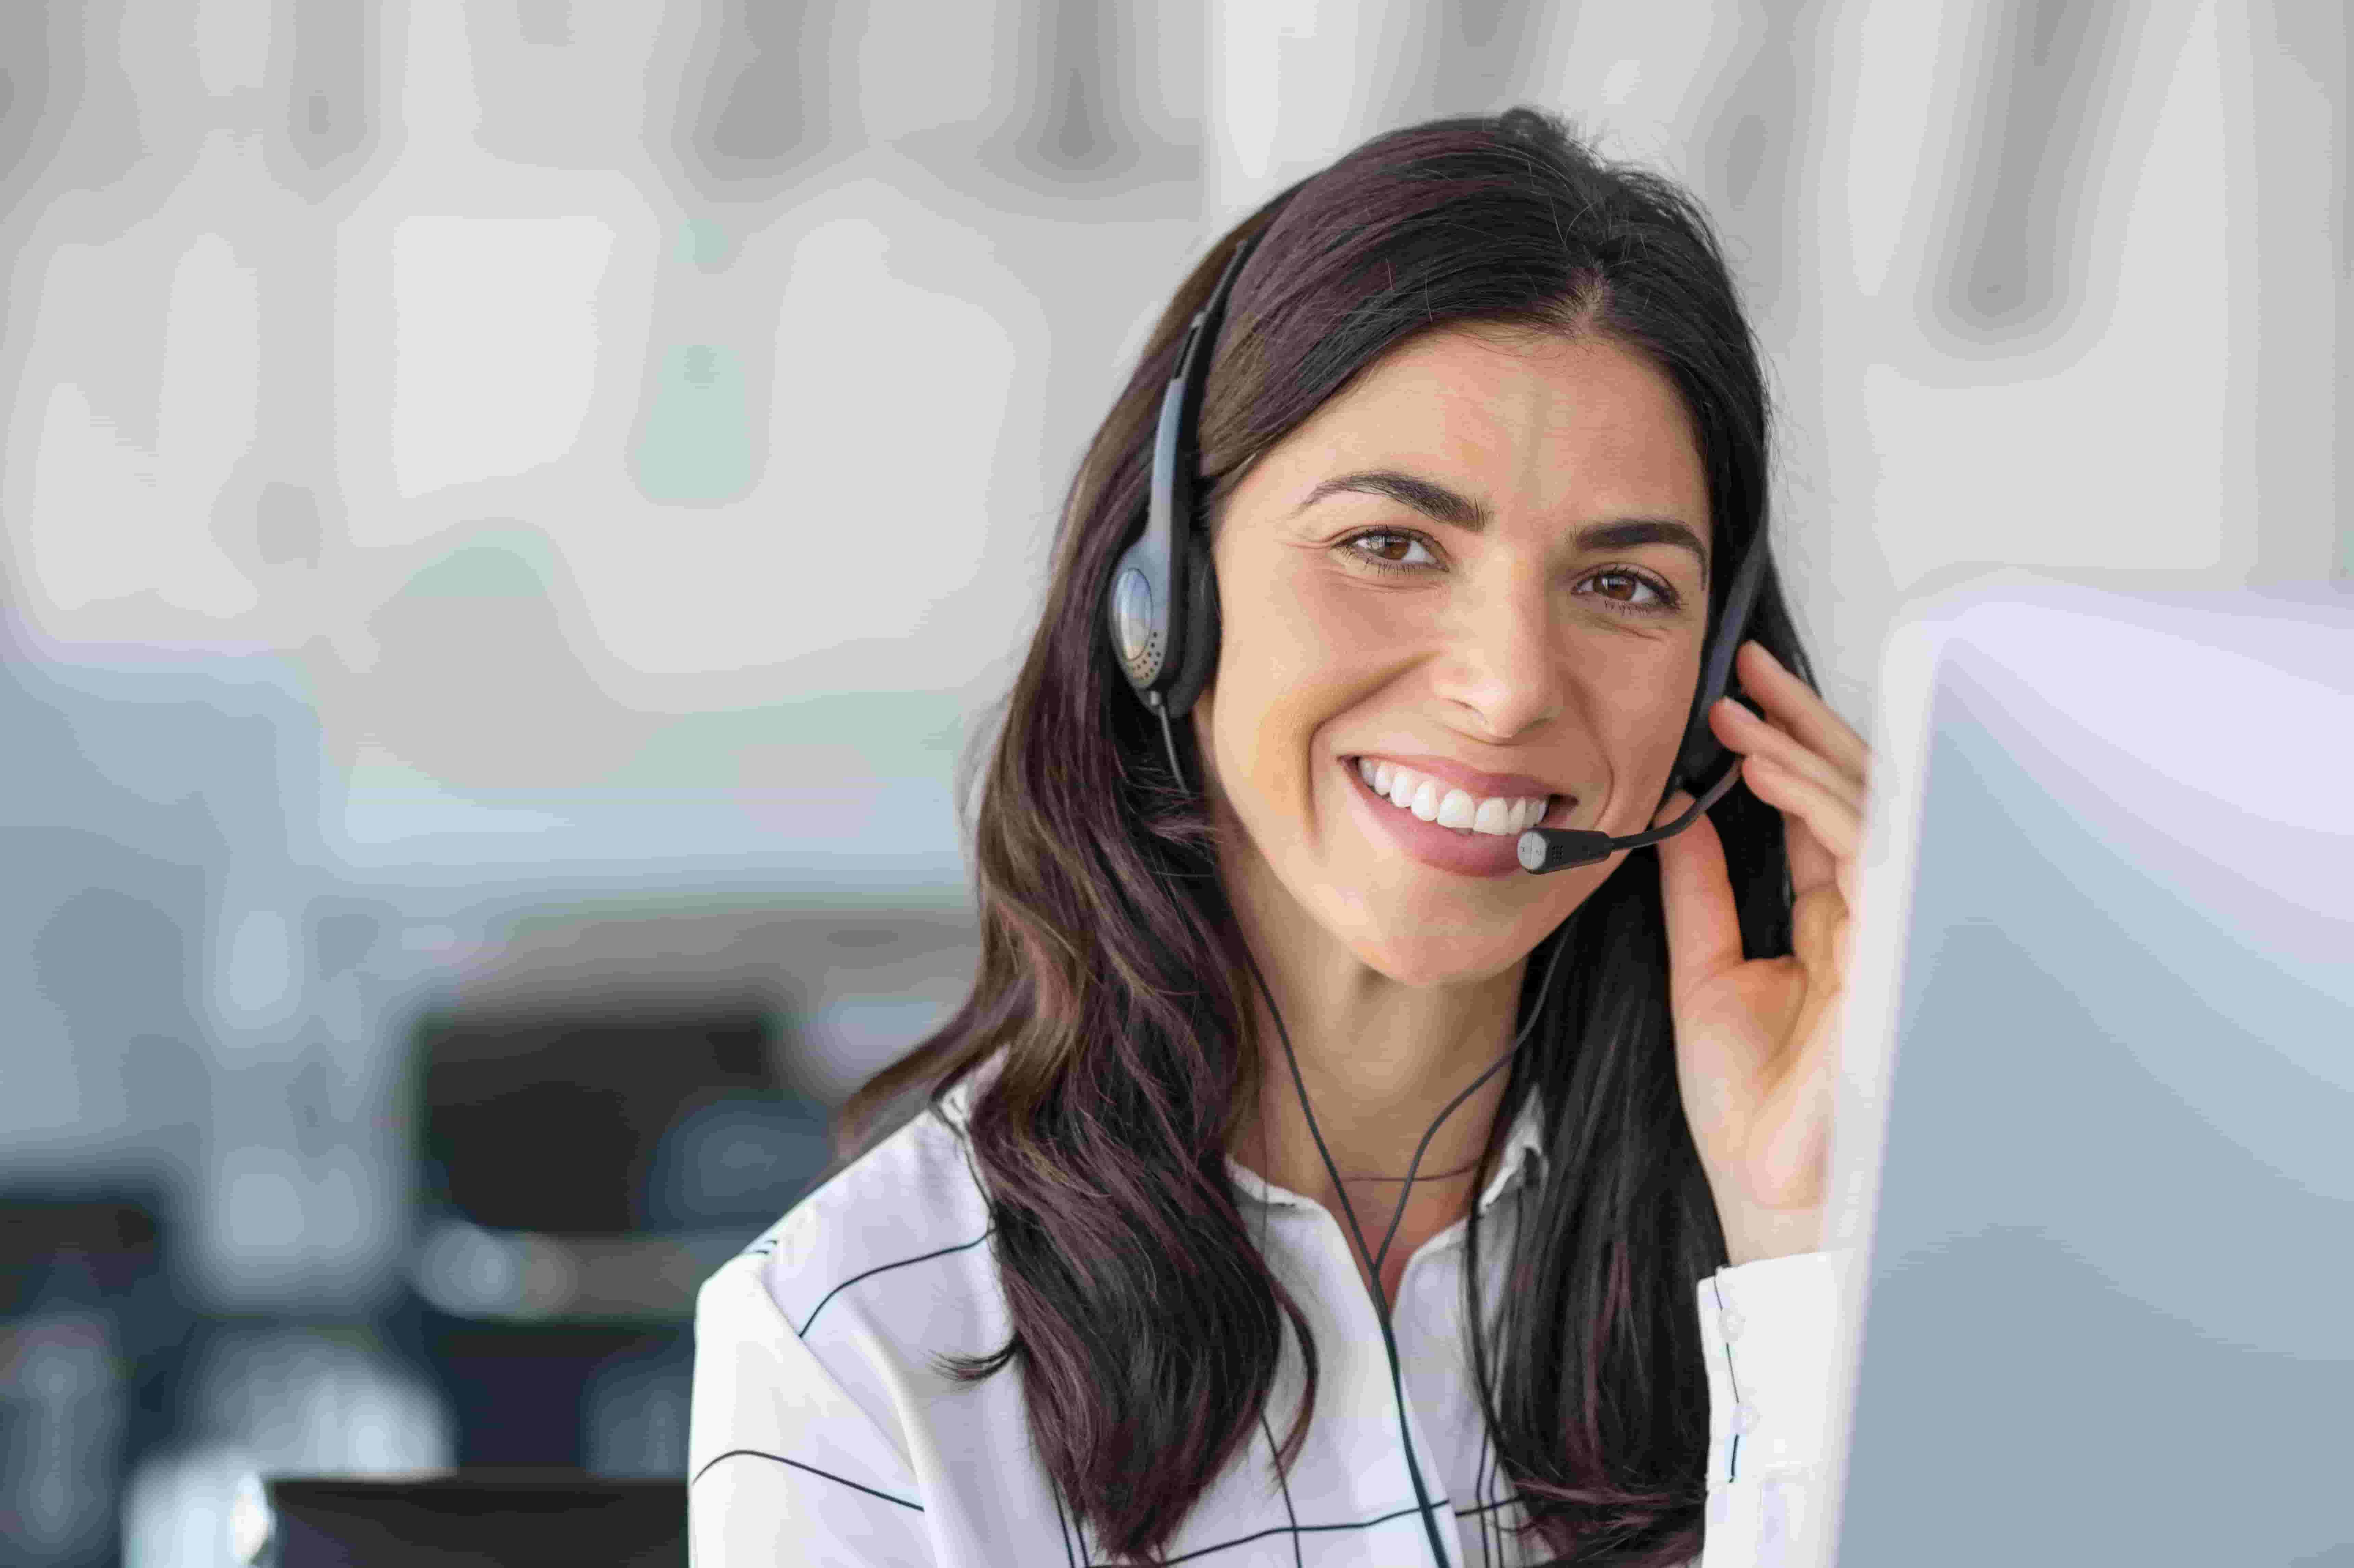 Outbound Telemarketing Services: Common Examples and How to Outsource Them